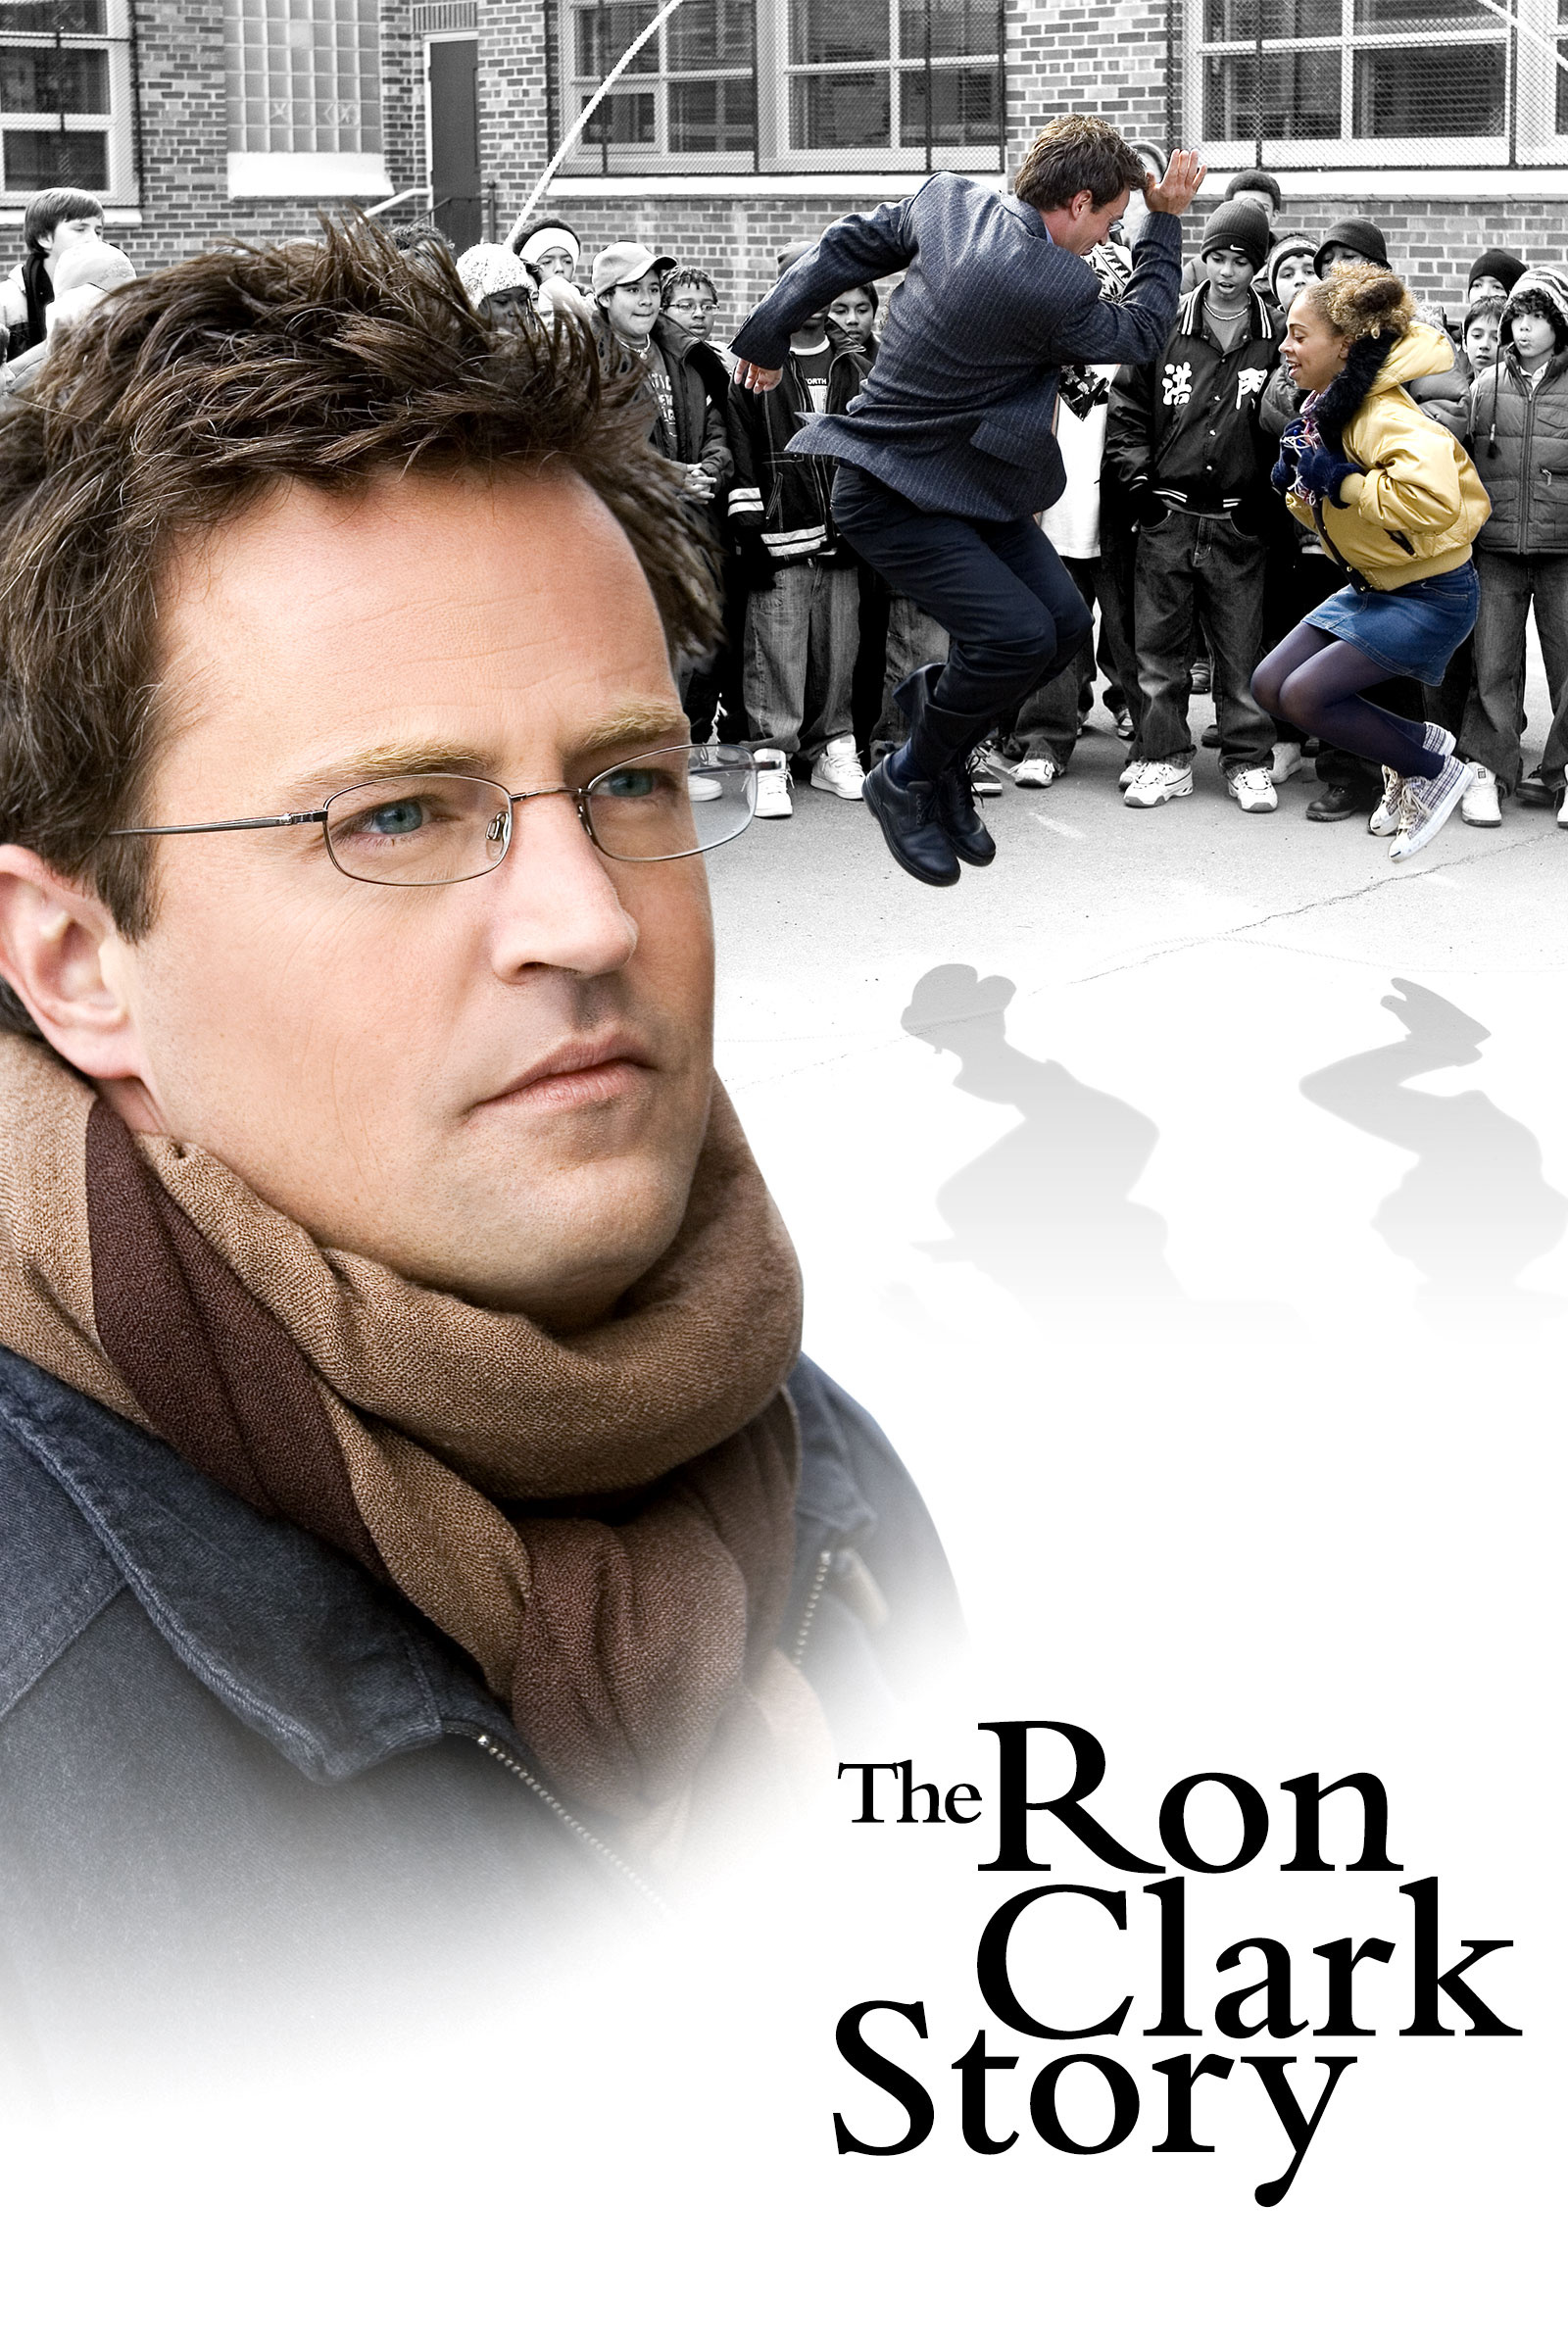 The Ron Clark Story (Movie): 2006 television film starring Matthew Perry, The tale of an idealistic teacher, Randa Haines. 1600x2400 HD Wallpaper.